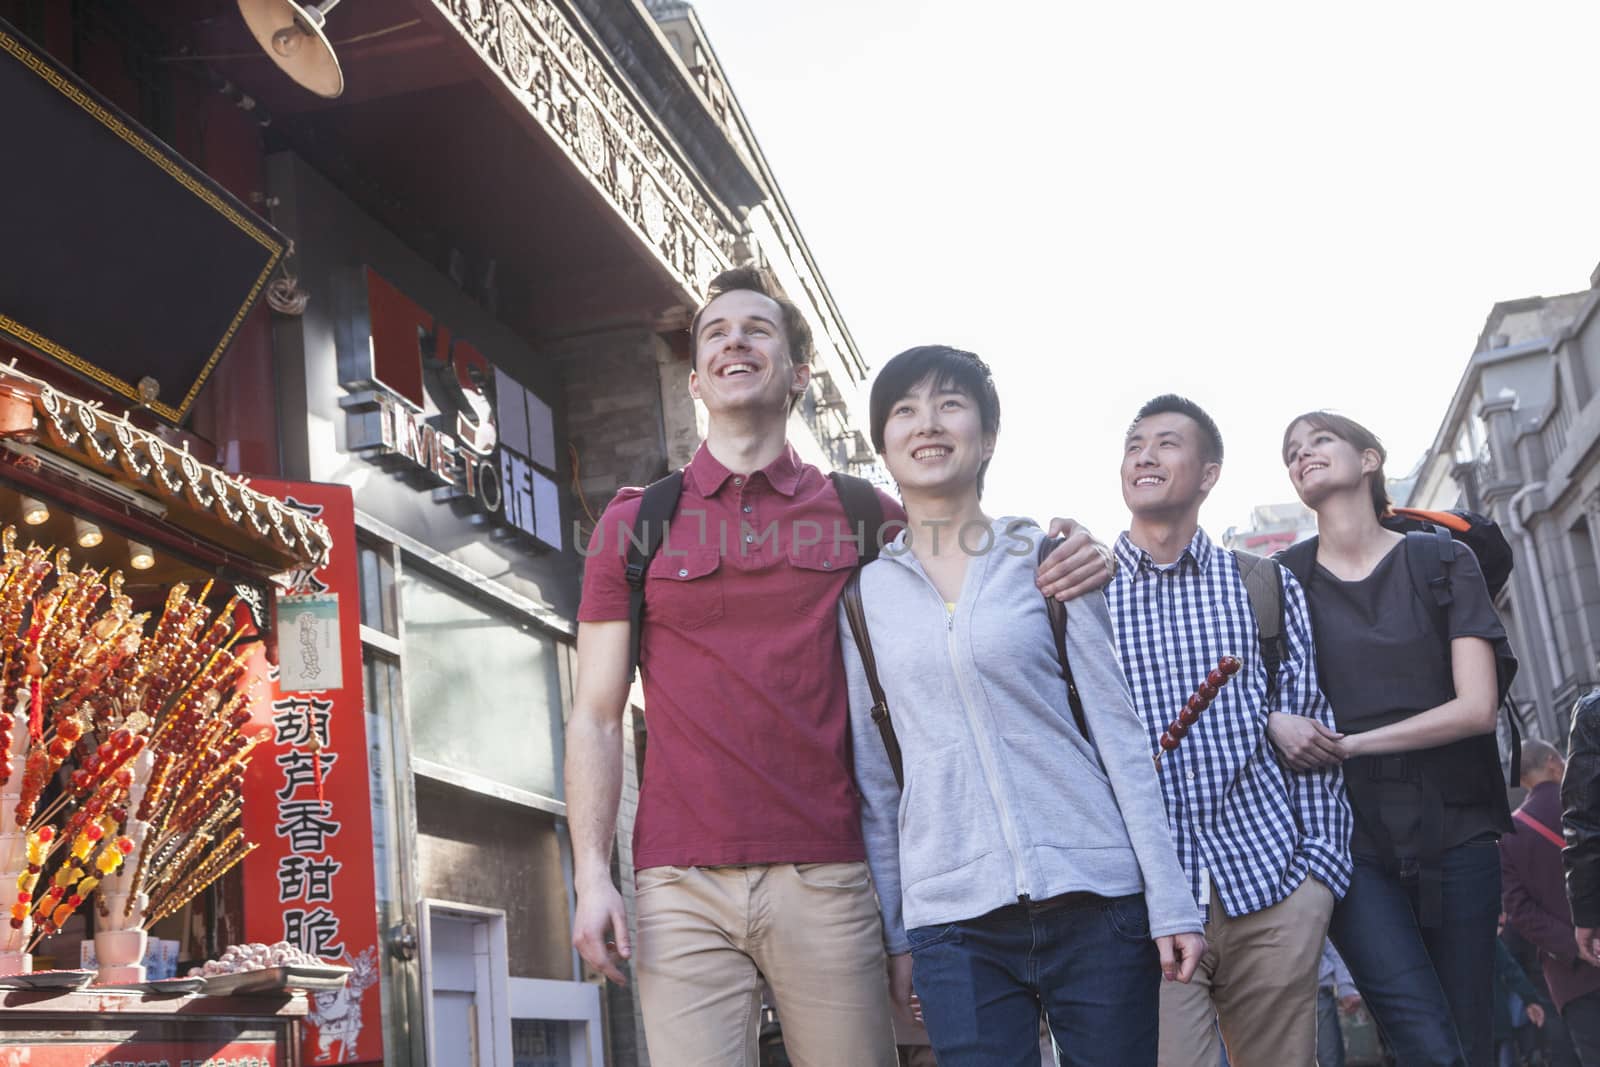 Four young people walking down street, near candied haw vendor.